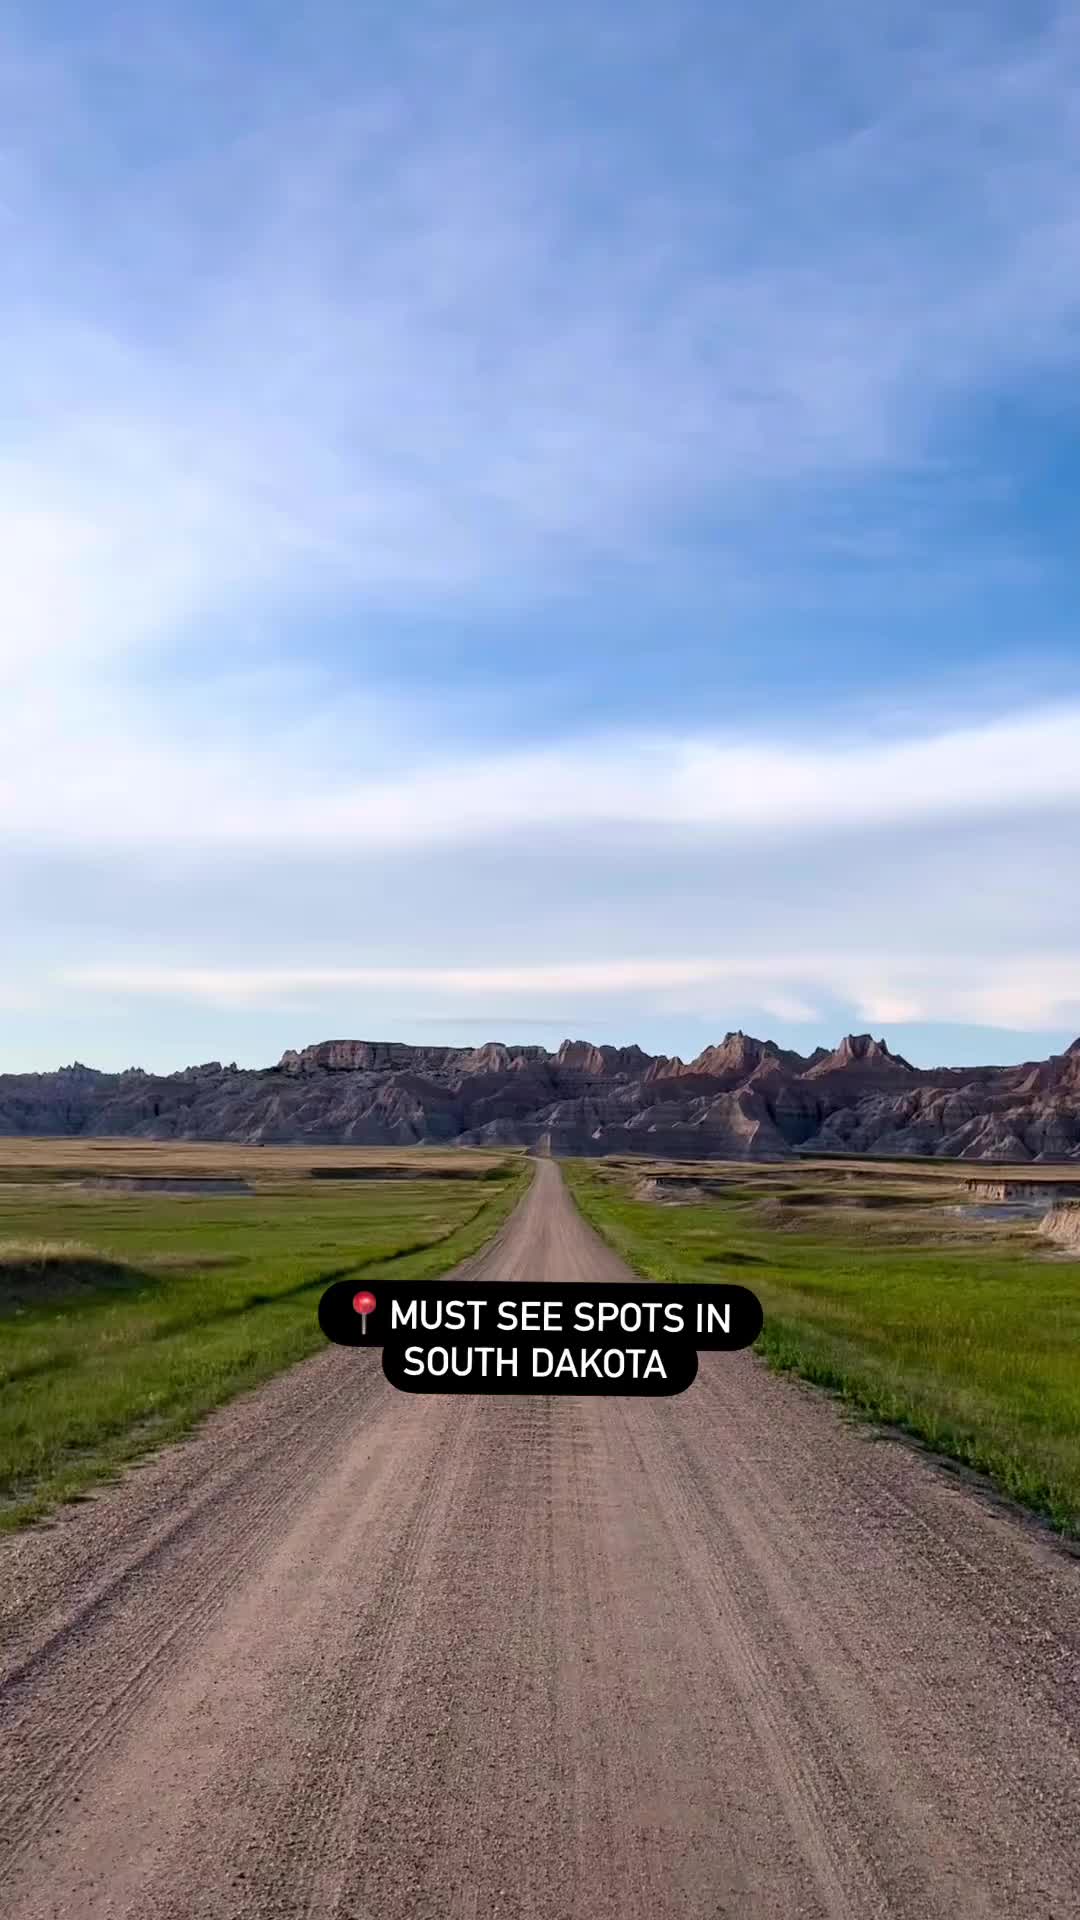 ✨ Save this post for your next South Dakota trip! 

🦬 We recently took a road trip through South Dakota and it quickly became one of those states that blew us away with how underrated it is! Here are some of the must visit spots in the state! 

📍Badlands National Park 
📍Wind Cave National Park 
📍Jewel Cave National Monument 
📍Mount Rushmore National Monument 
📍Crazy Horse Memorial
📍Custer State Park 
📍Buffalo Gap Natural Grassland
📍Rapid City @visitrapidcity
📍Black Hills National Forest
📍Sioux Falls
📍@theworldsonlycornpalace
📍@historicdeadwood

📸 Come join along as we travel the National Parks giving our best tips and itineraries!
@thenationalparktravelers 

#sodak #visitsouthdakota #badlandsnationalpark #custerstatepark #windcavenationalpark #mountrushmore #travelcouple #adventure